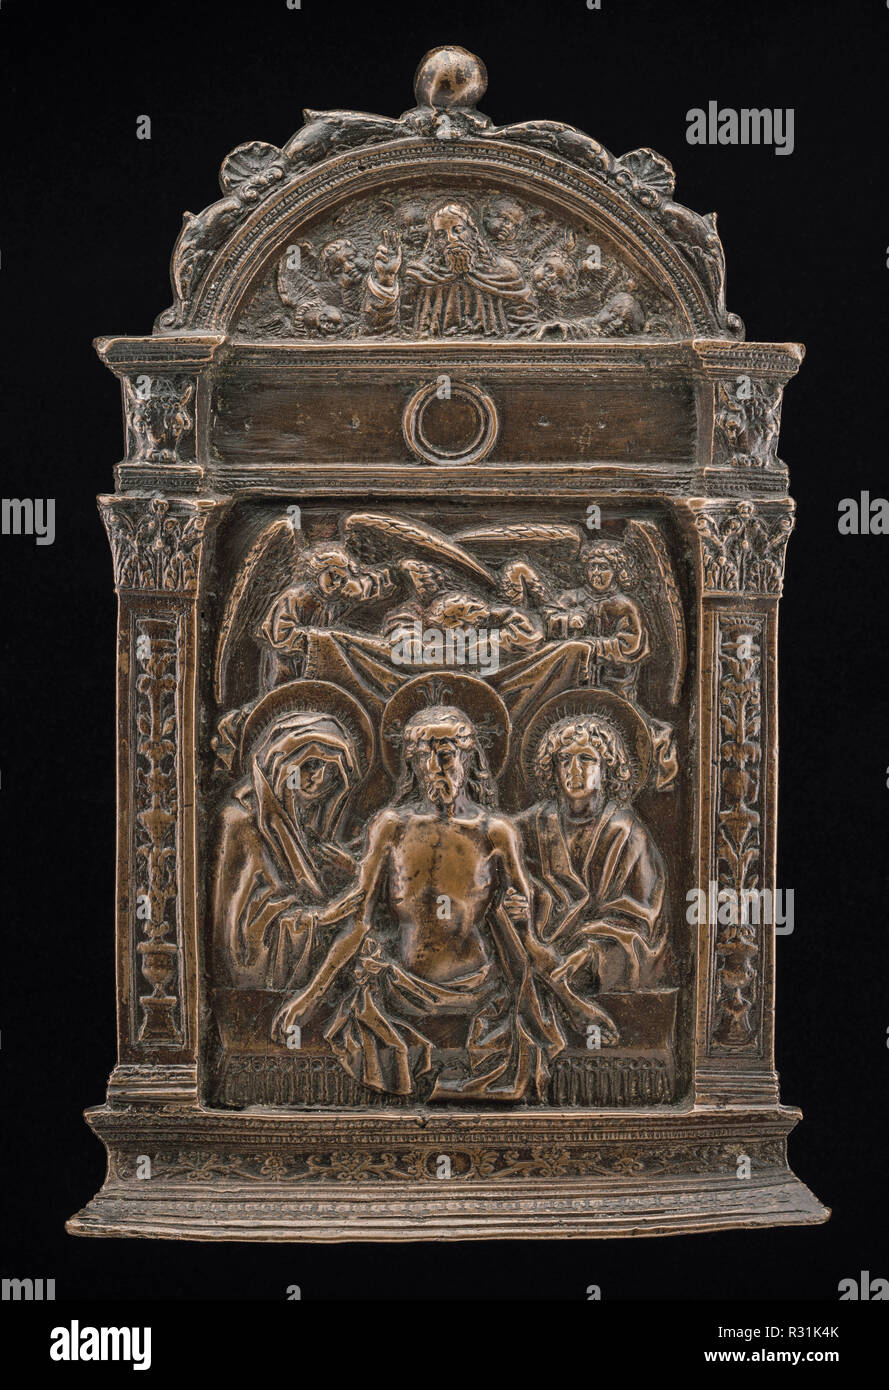 The Dead Christ between the Virgin and Saint John. Dated: c. 1500. Dimensions: Overall (without frame): 939 x 761 cm (369 11/16 x 299 5/8 in.)  accessory size: 17.8 x 11.4 cm (7 x 4 1/2 in.) gross weight: 506 gr. Medium: bronze//Medium brown patina. Museum: National Gallery of Art, Washington DC. Author: Venetian 16th Century. Stock Photo